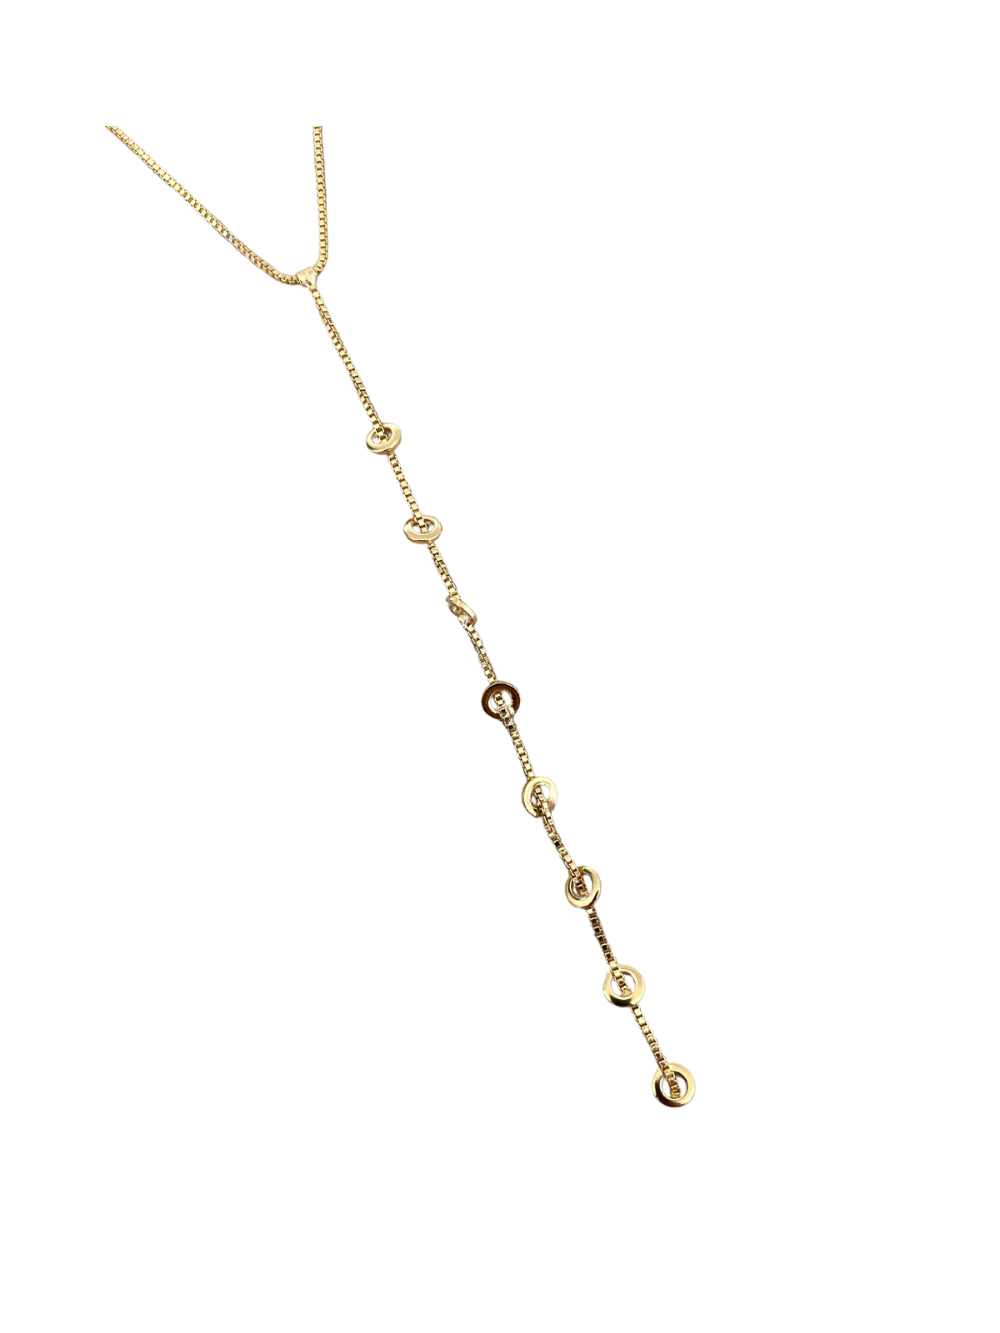 Gold Filled Circle Lariat Necklace